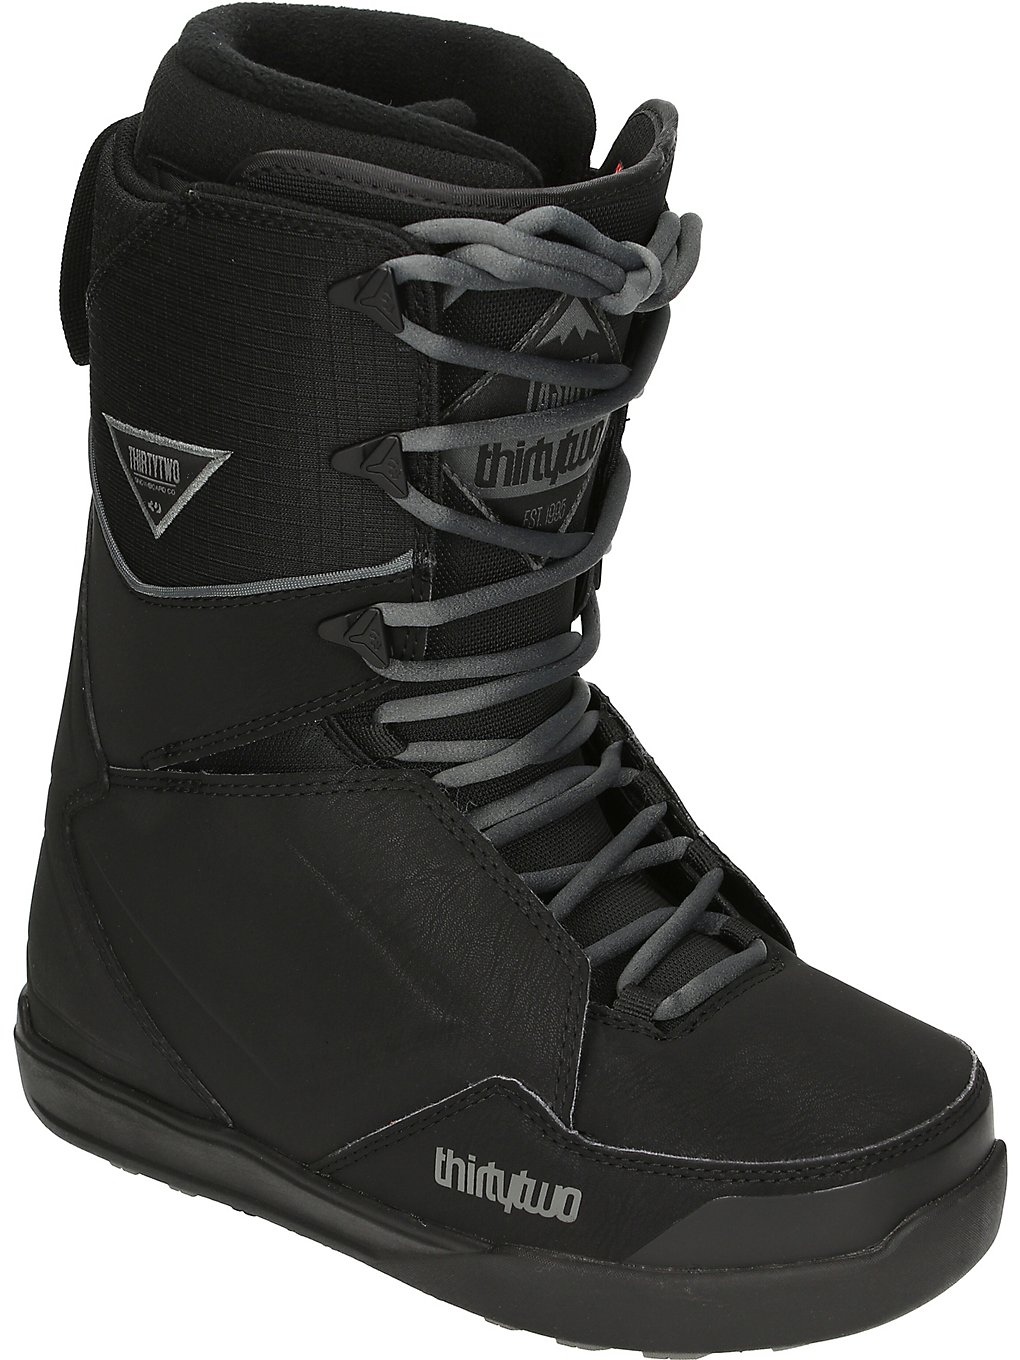 ThirtyTwo Lashed 2022 Snowboard Boots charcoal kaufen